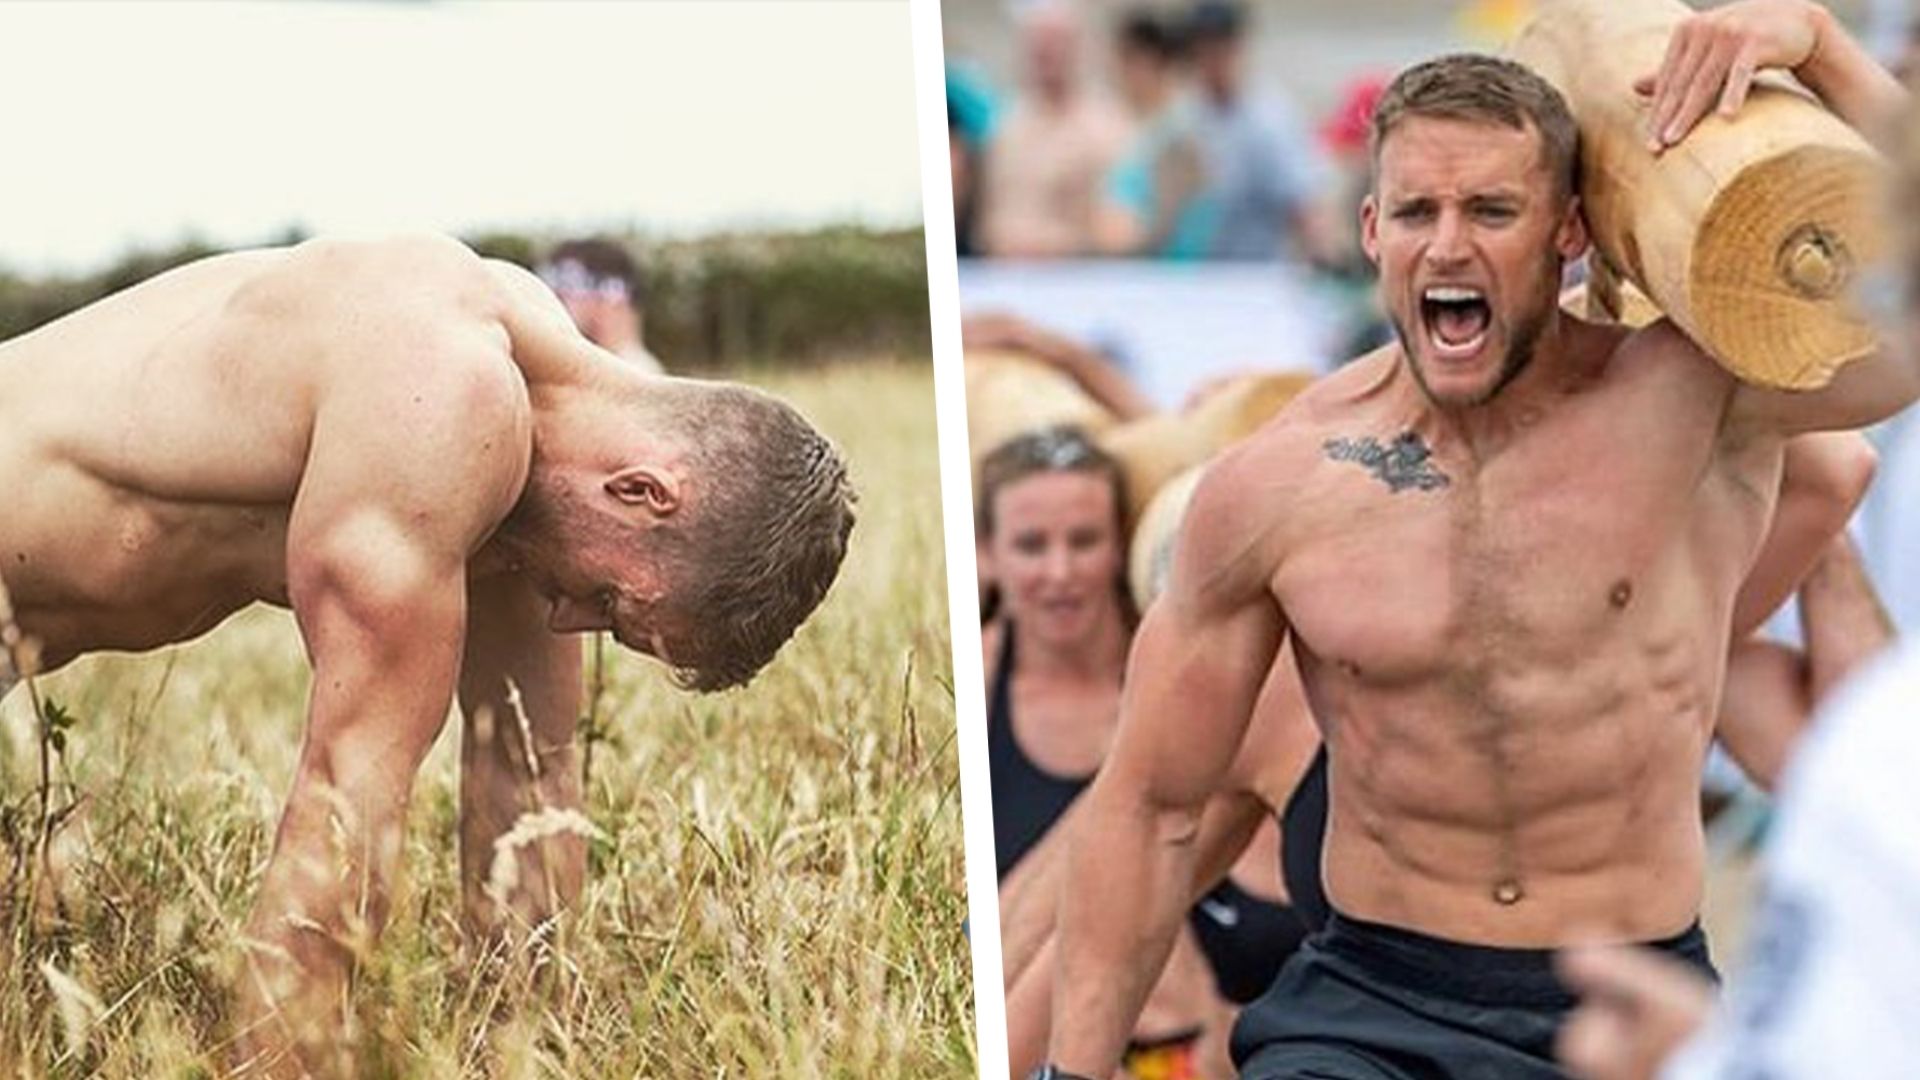 Matt Sallis Set A World Record For The Most Chest To Ground Burpees In 12 Hours